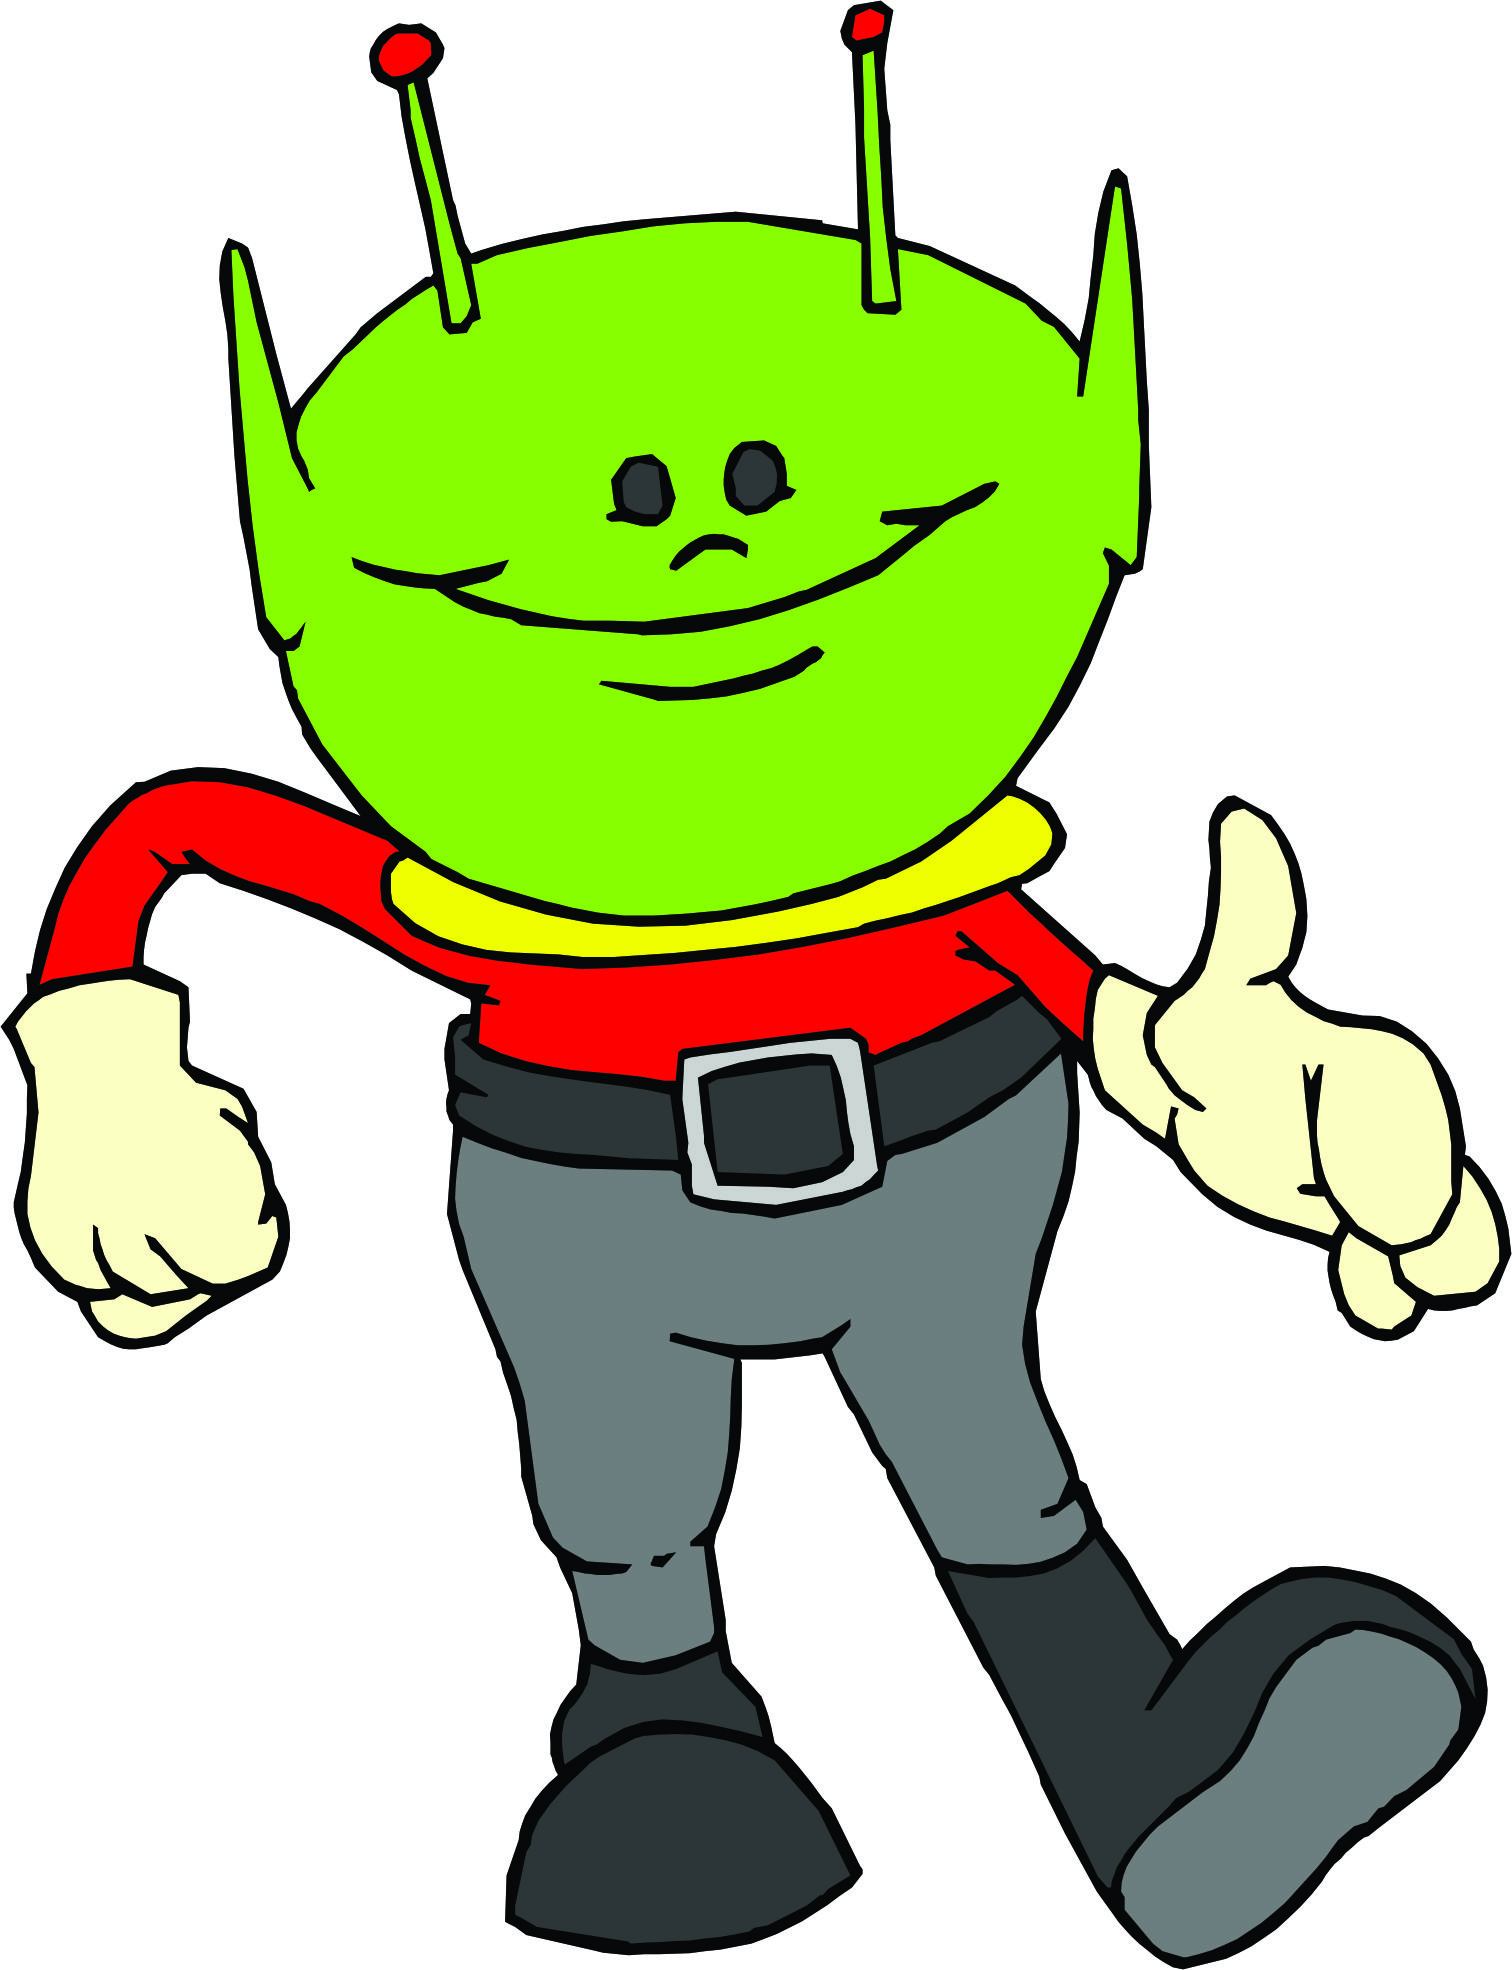 Cartoon Aliens | Page 3 - Clipart library - Clipart library